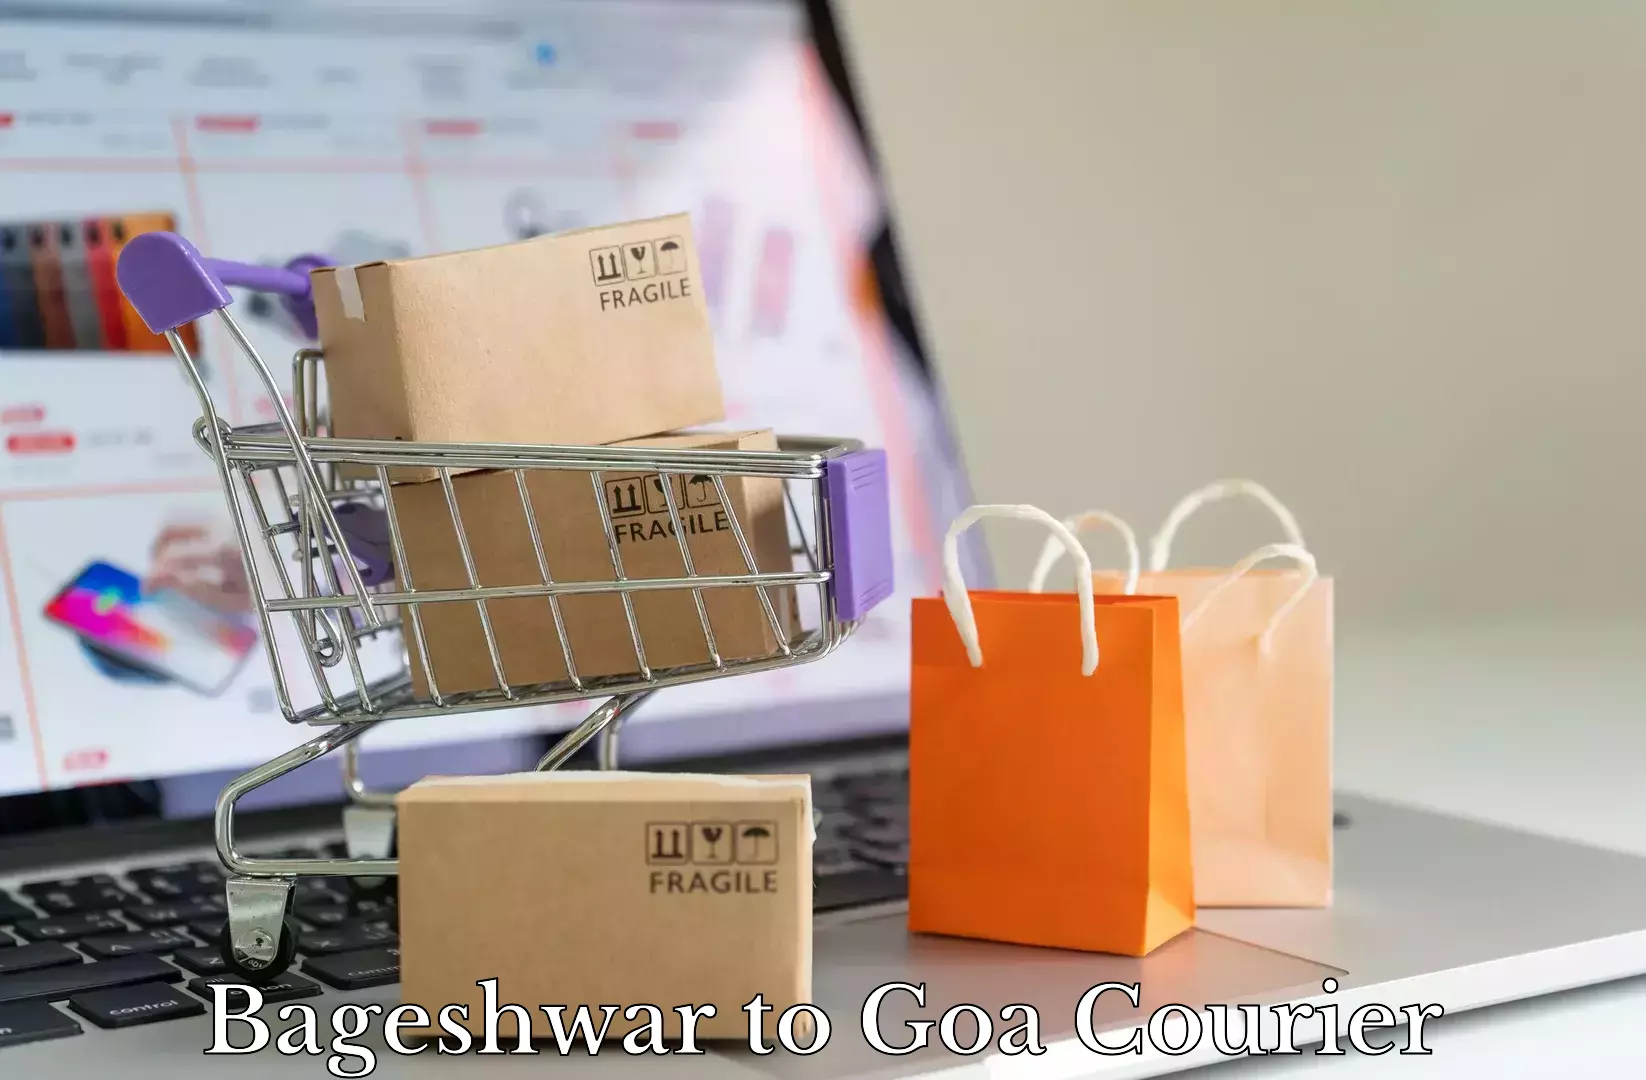 Trusted moving company Bageshwar to Goa